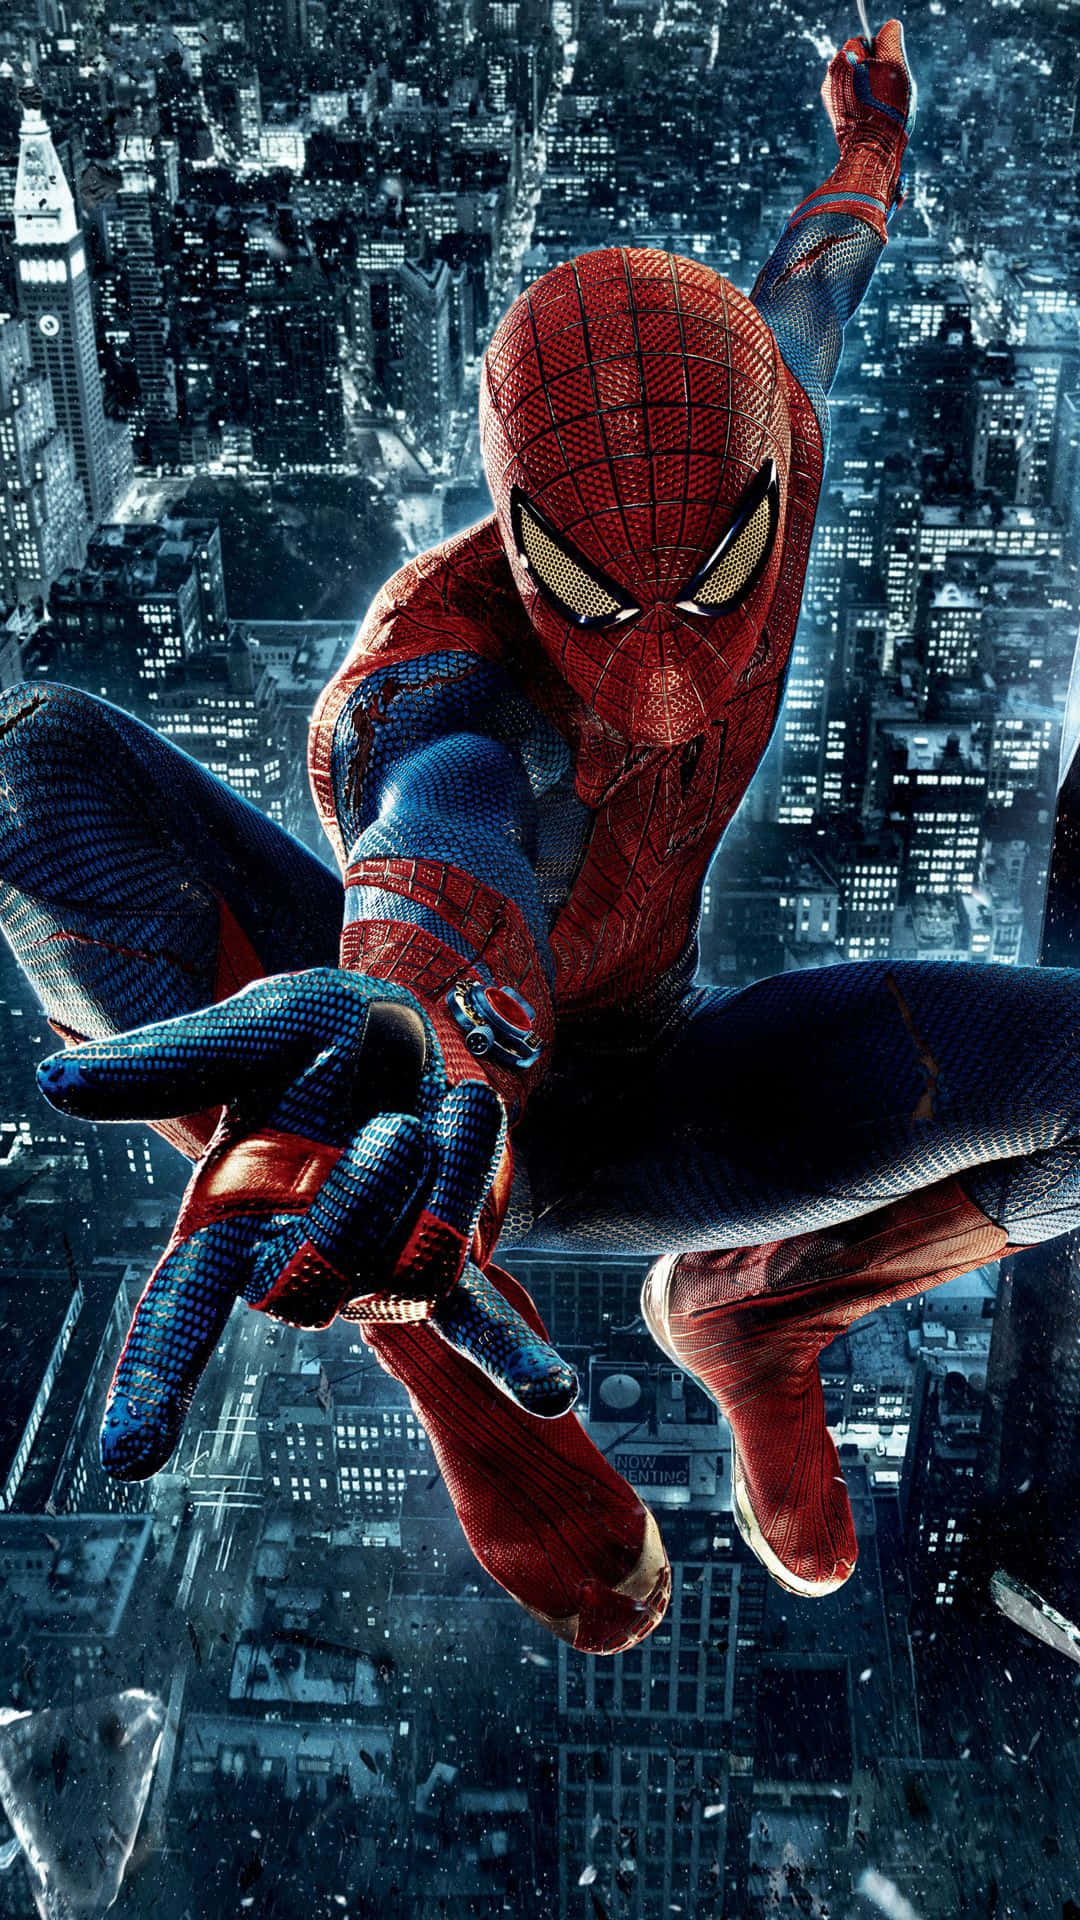 Get closer to Peter Parker's heroic alter-ego in "The Best Spider-Man" Wallpaper